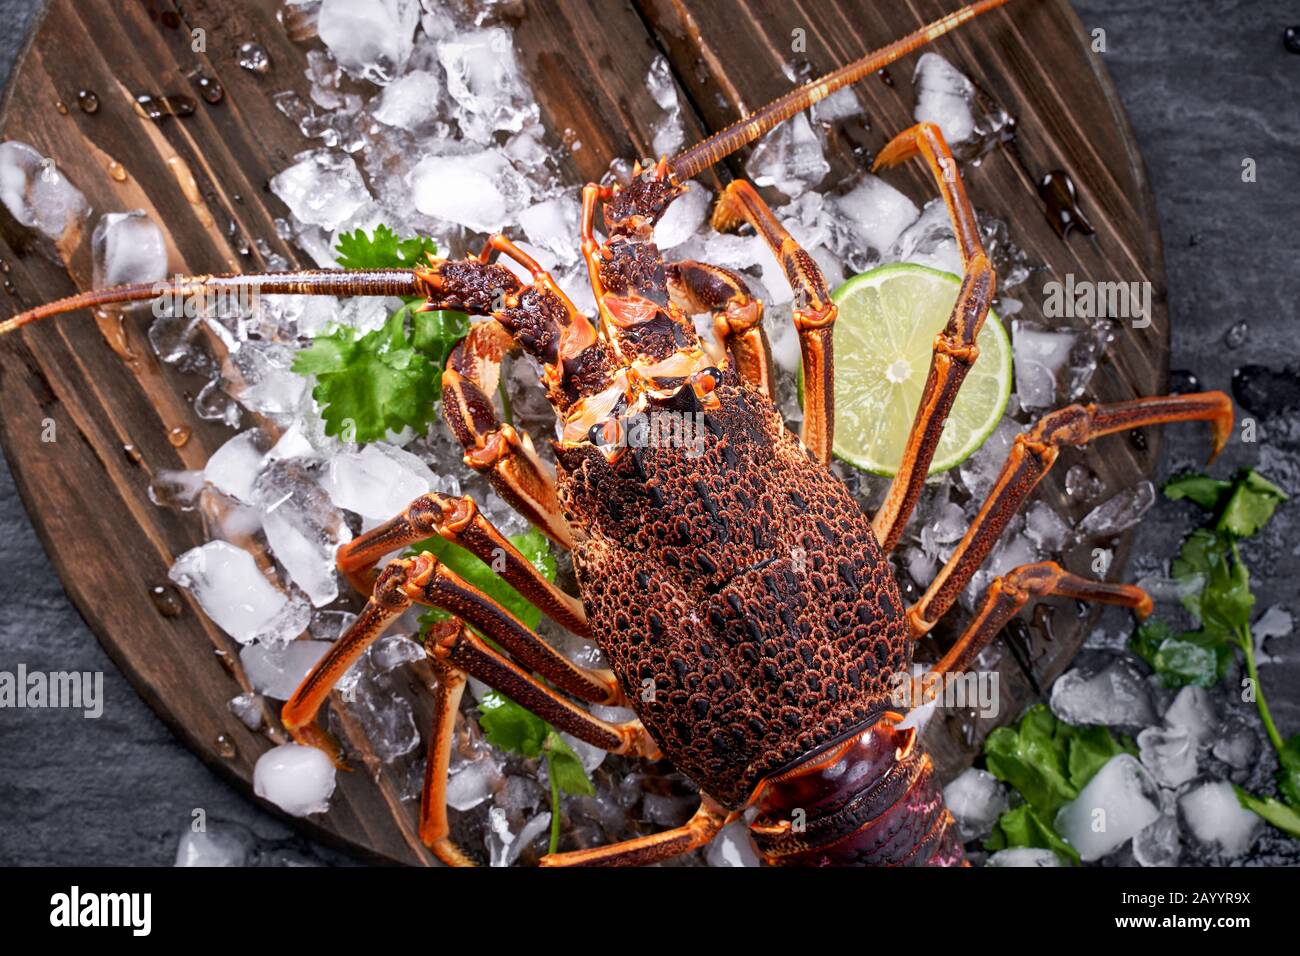 Placing Southern Rock Lobster Into A White Crate Stock Photo